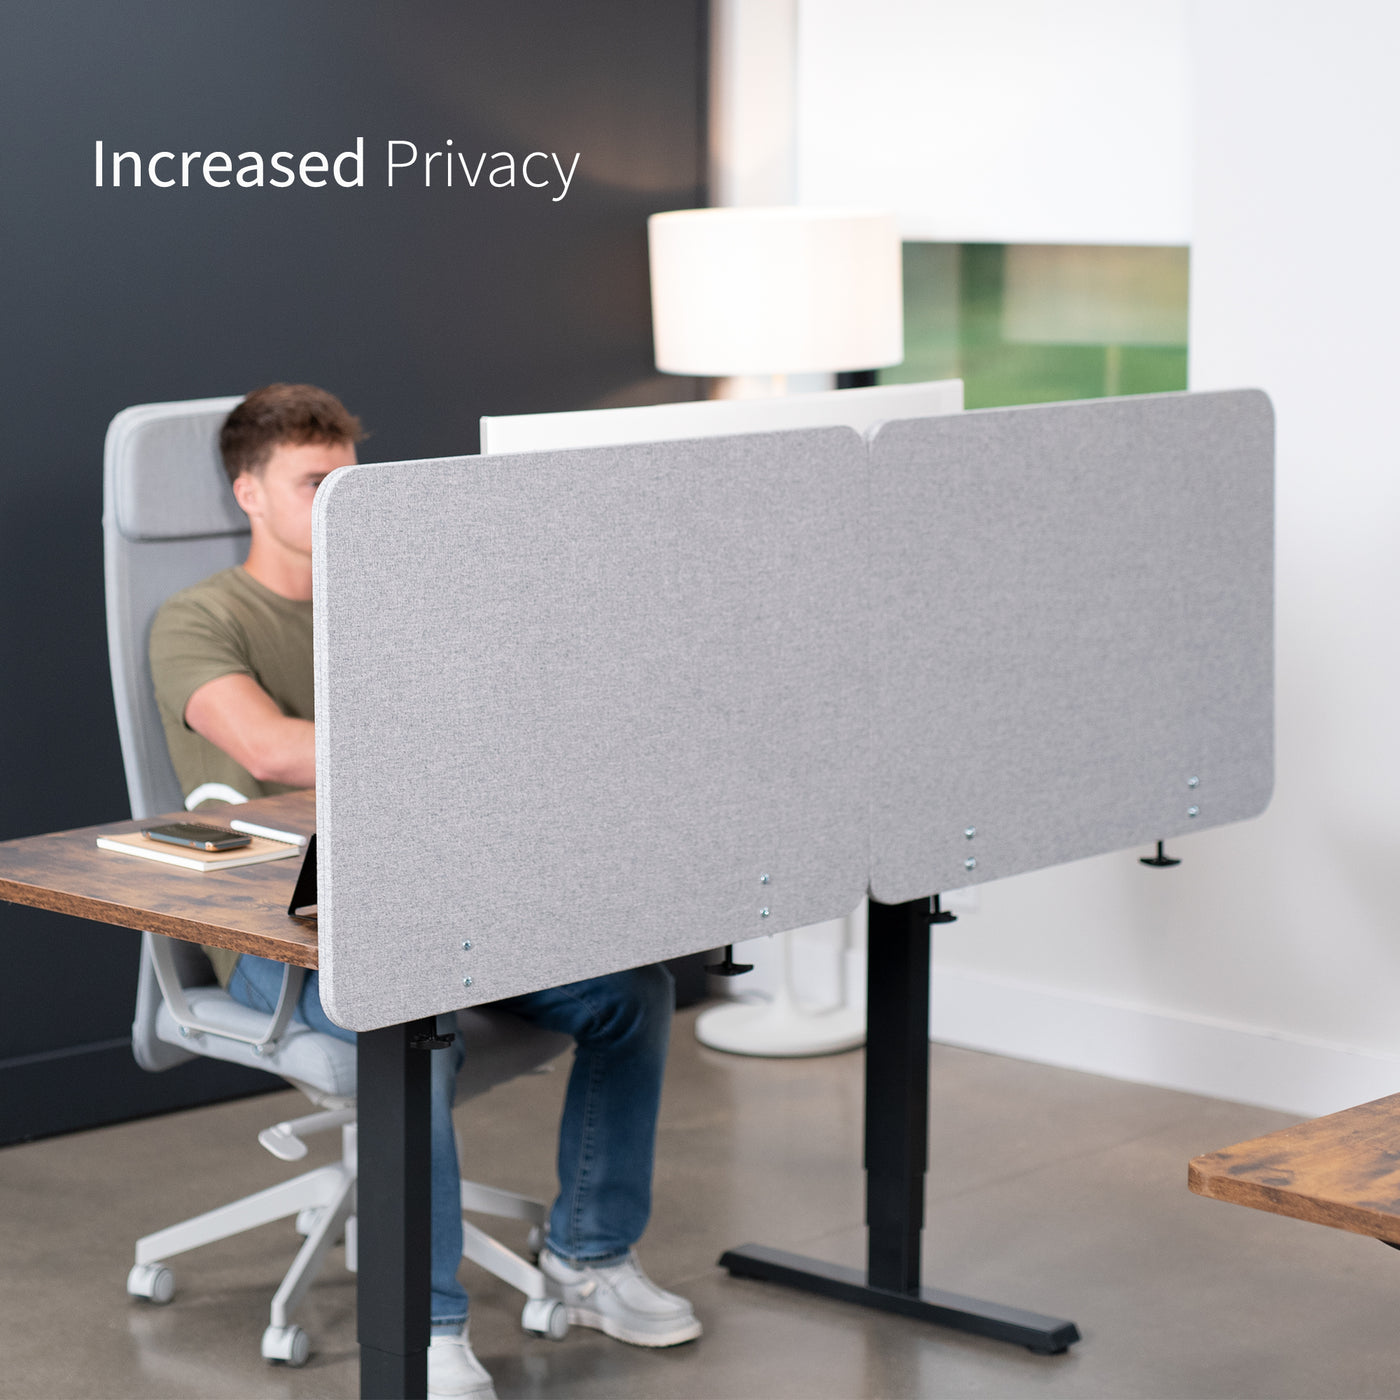 Clamp-on desk privacy panel for office workspace with increased privacy.